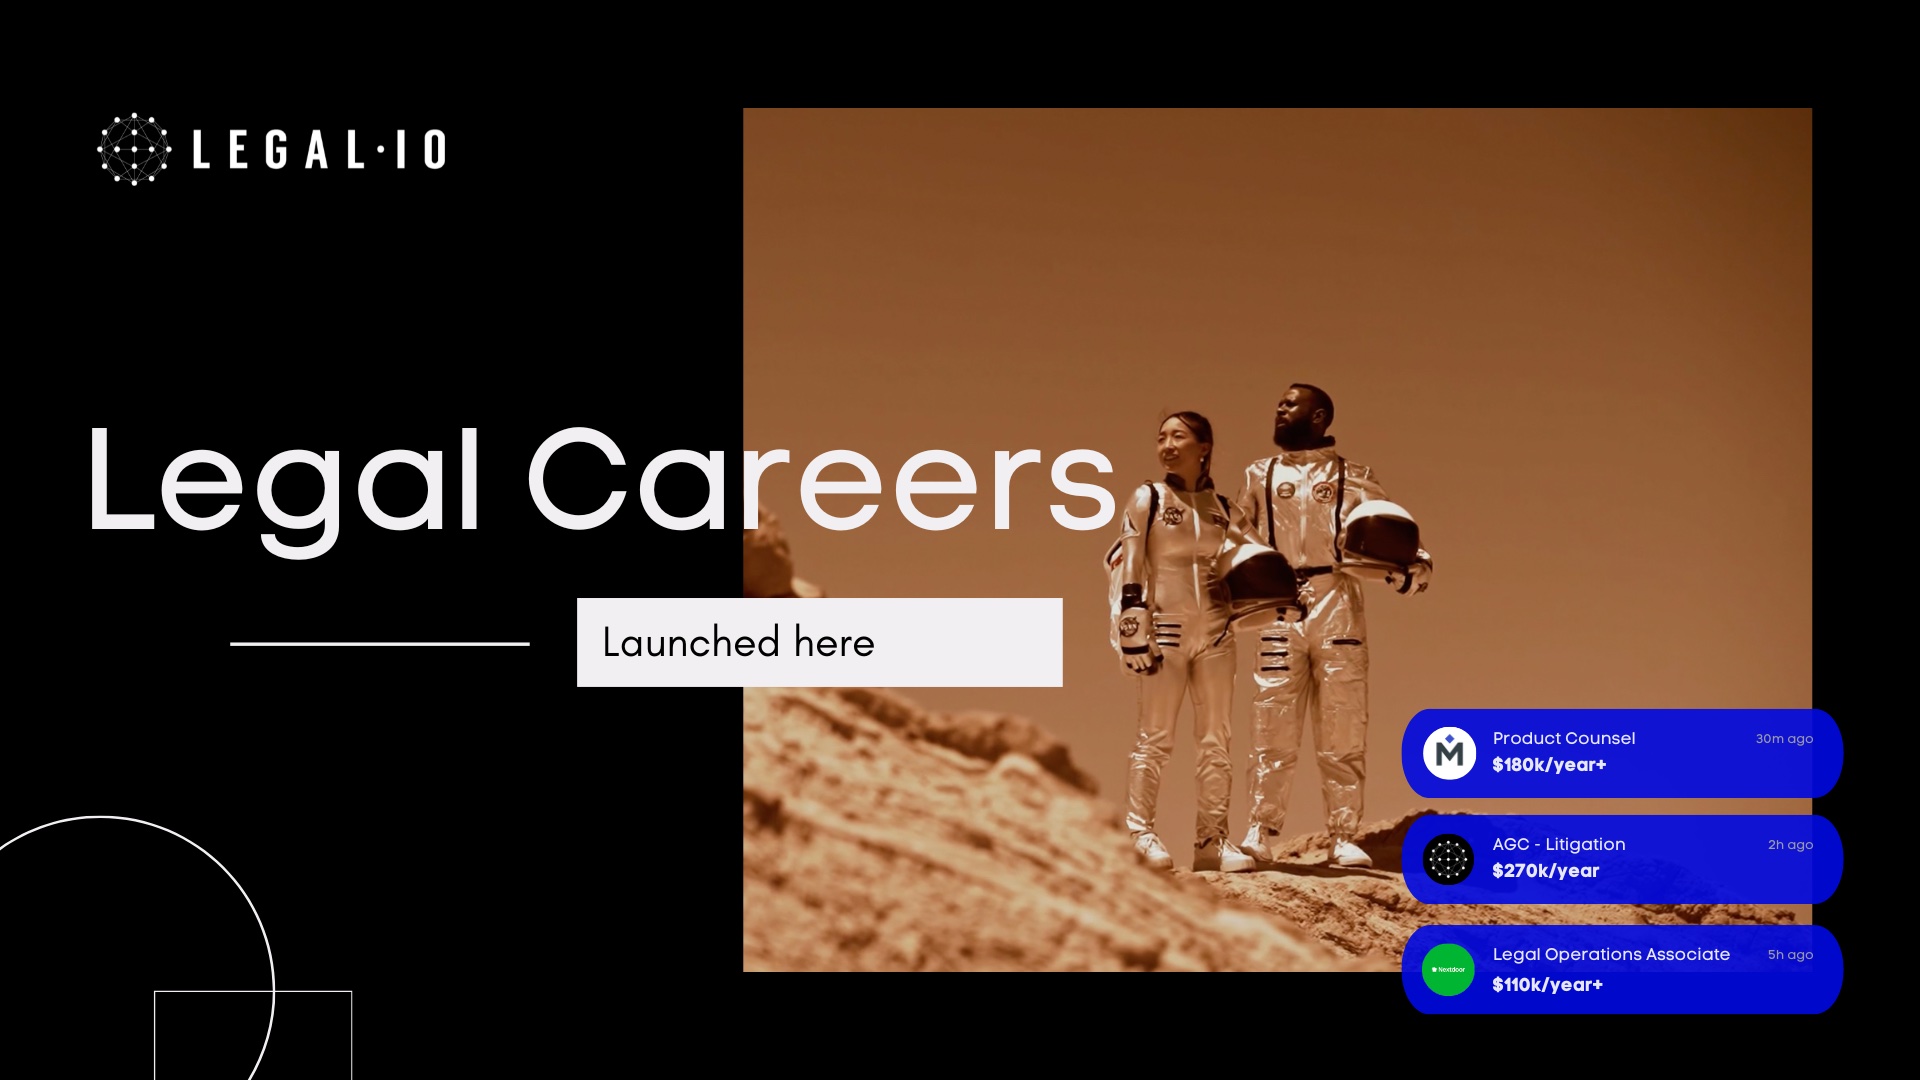 Legal Careers, Launched Here